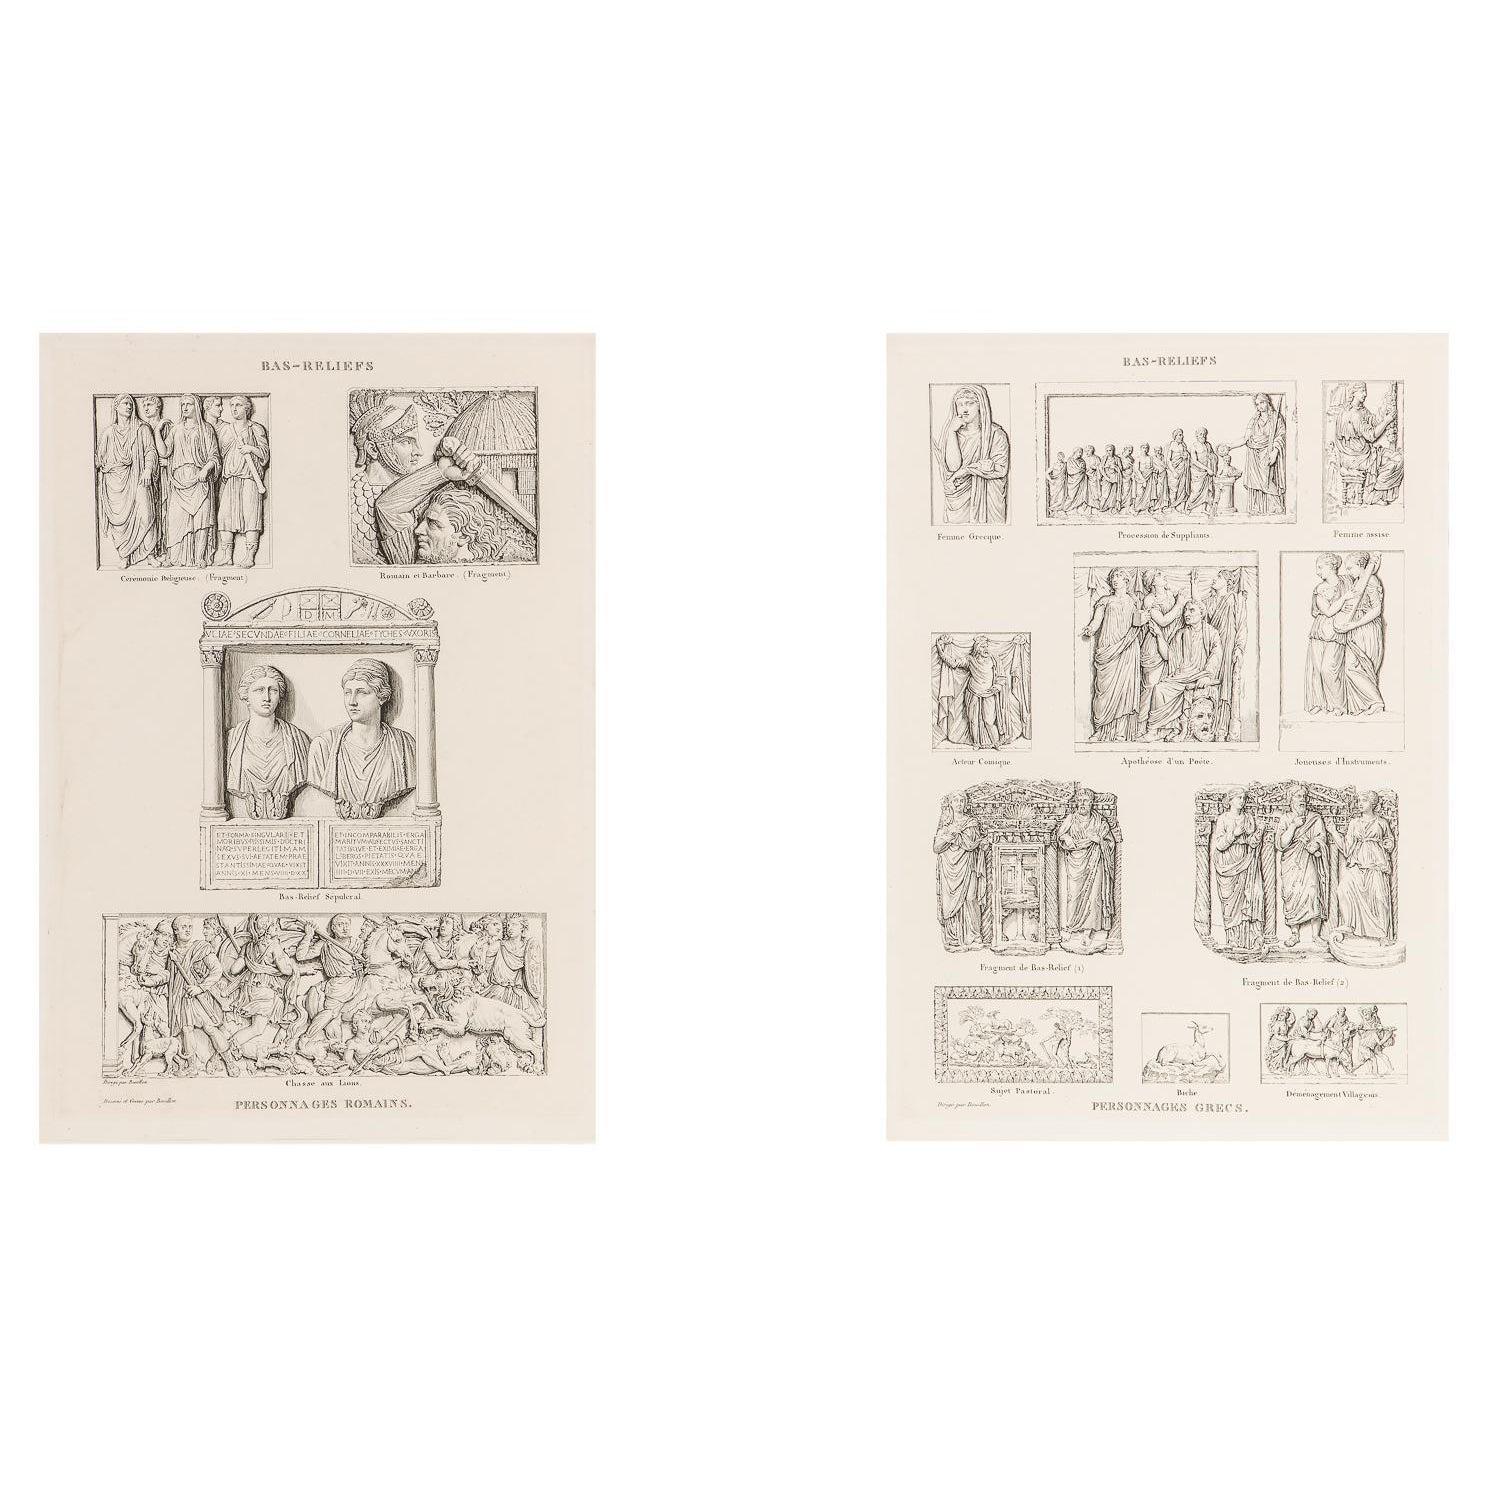 18th Century style Pierre Bouillon neoclassical engraving Prints of Roman & Greek Friezes. Beautifully framed.

Additional information:
Materials: Giltwood, paper
Color: White
Period: Early 20th Century
Art Subjects: Architecture
Styles: